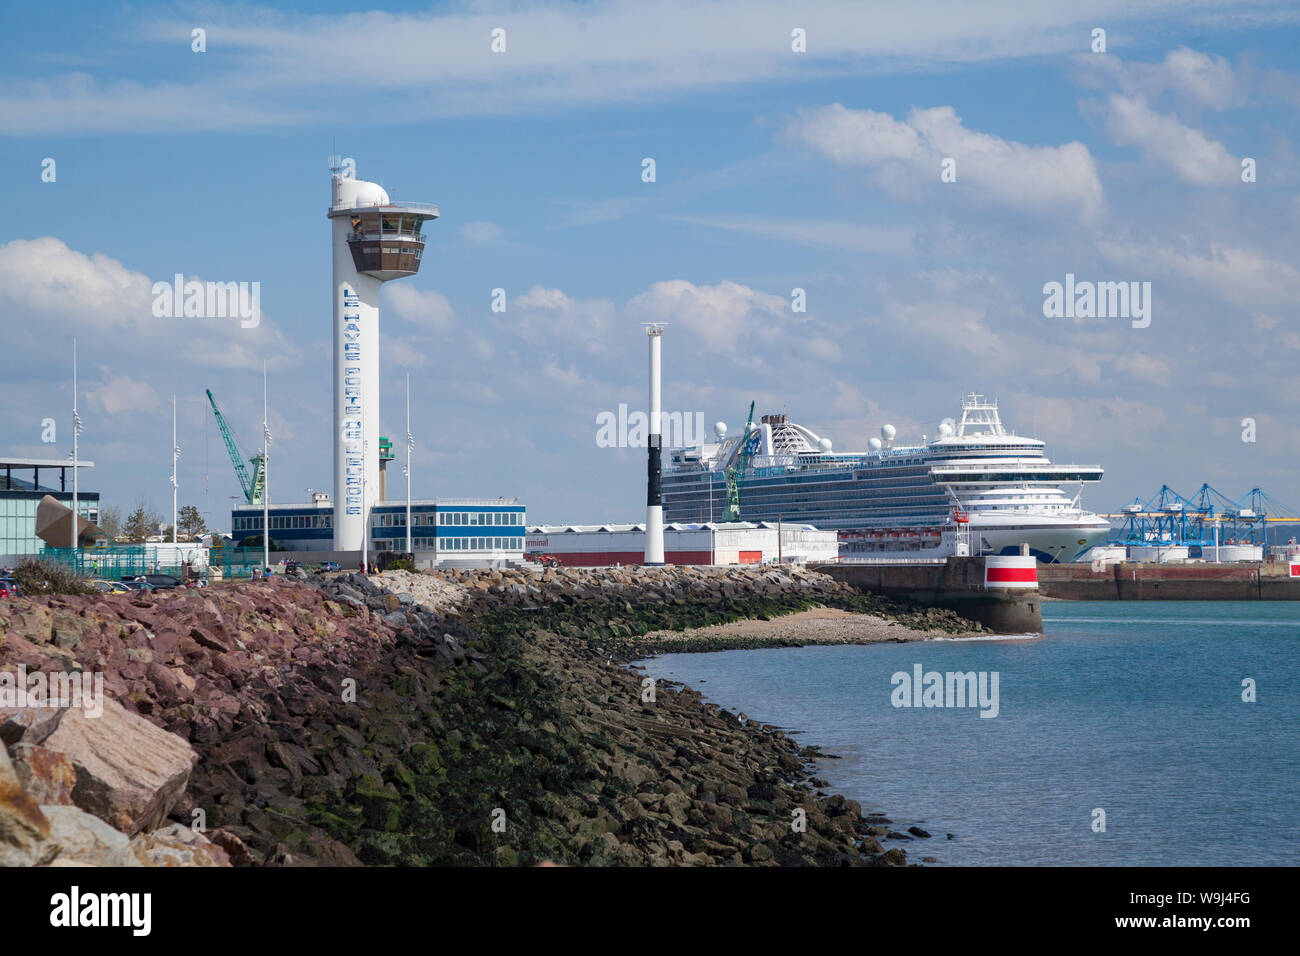 The Cruise Ship Crown Princess docked at the Cruise Terminal in Le Havre, Normandy, France Stock Photo